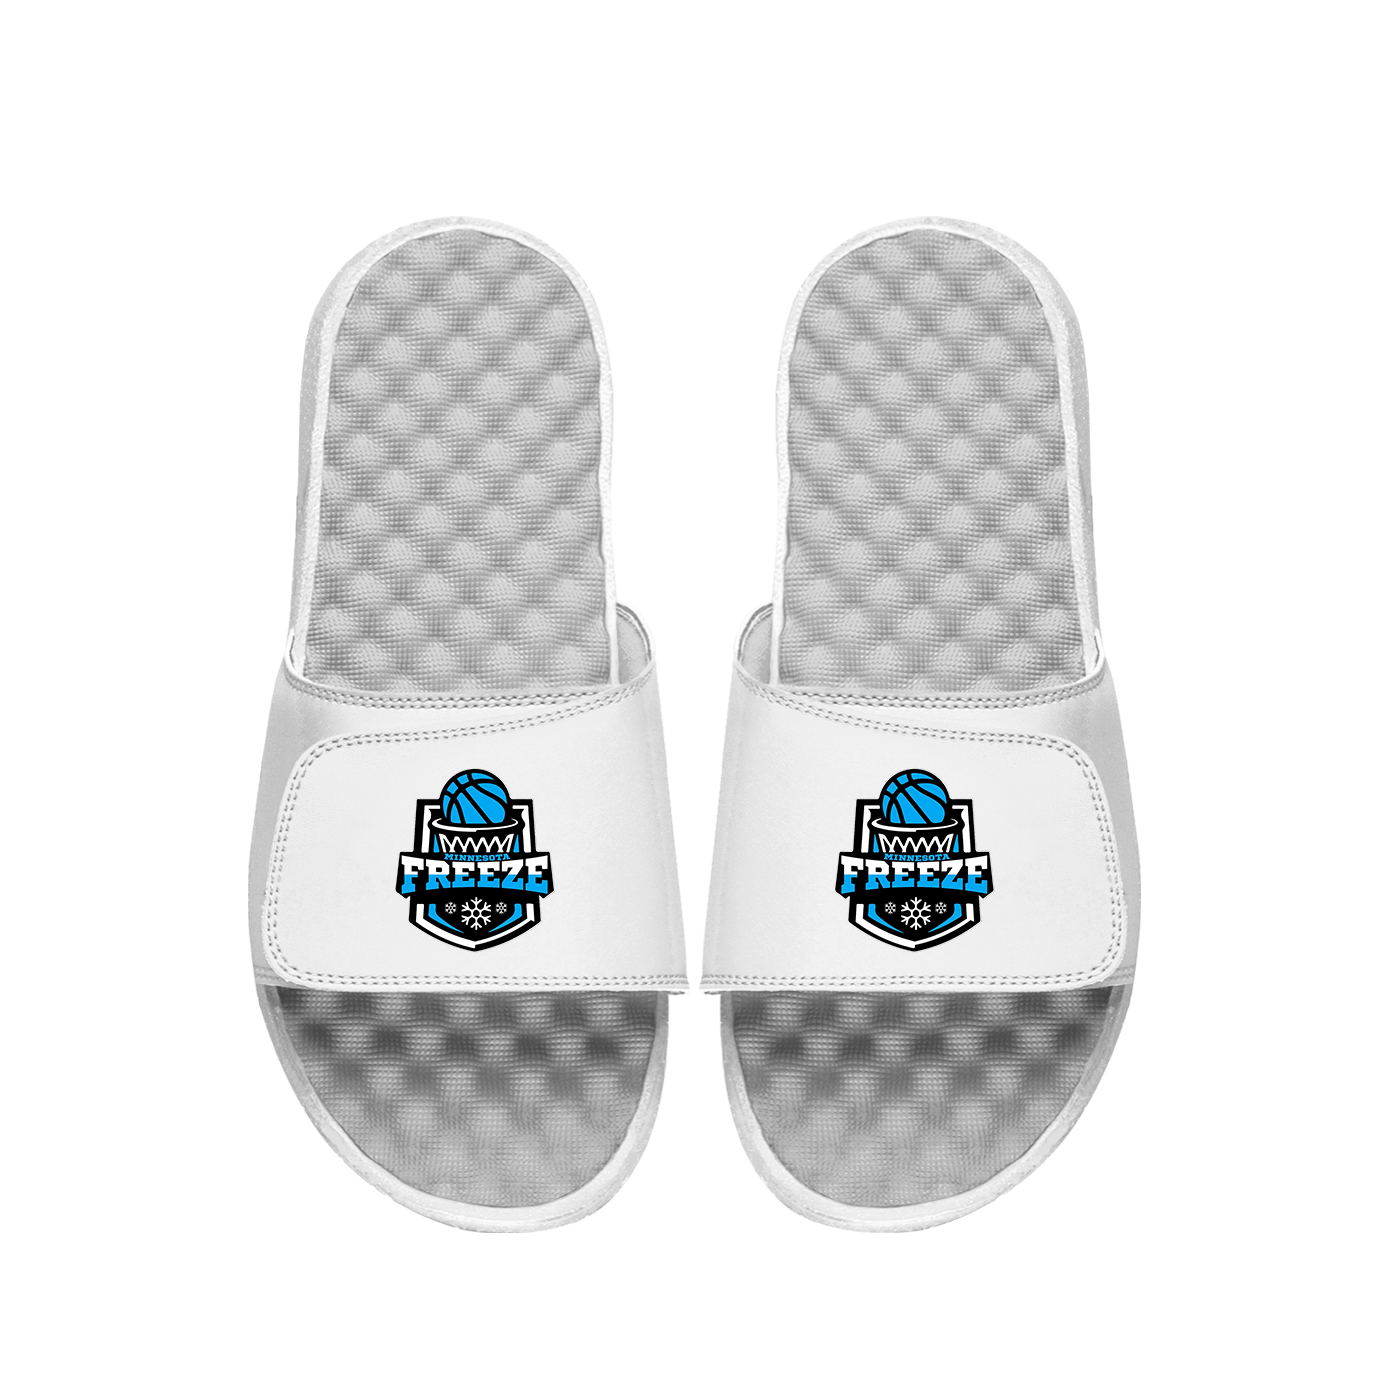 Freeze Basketball Primary PERSONALIZE Slides